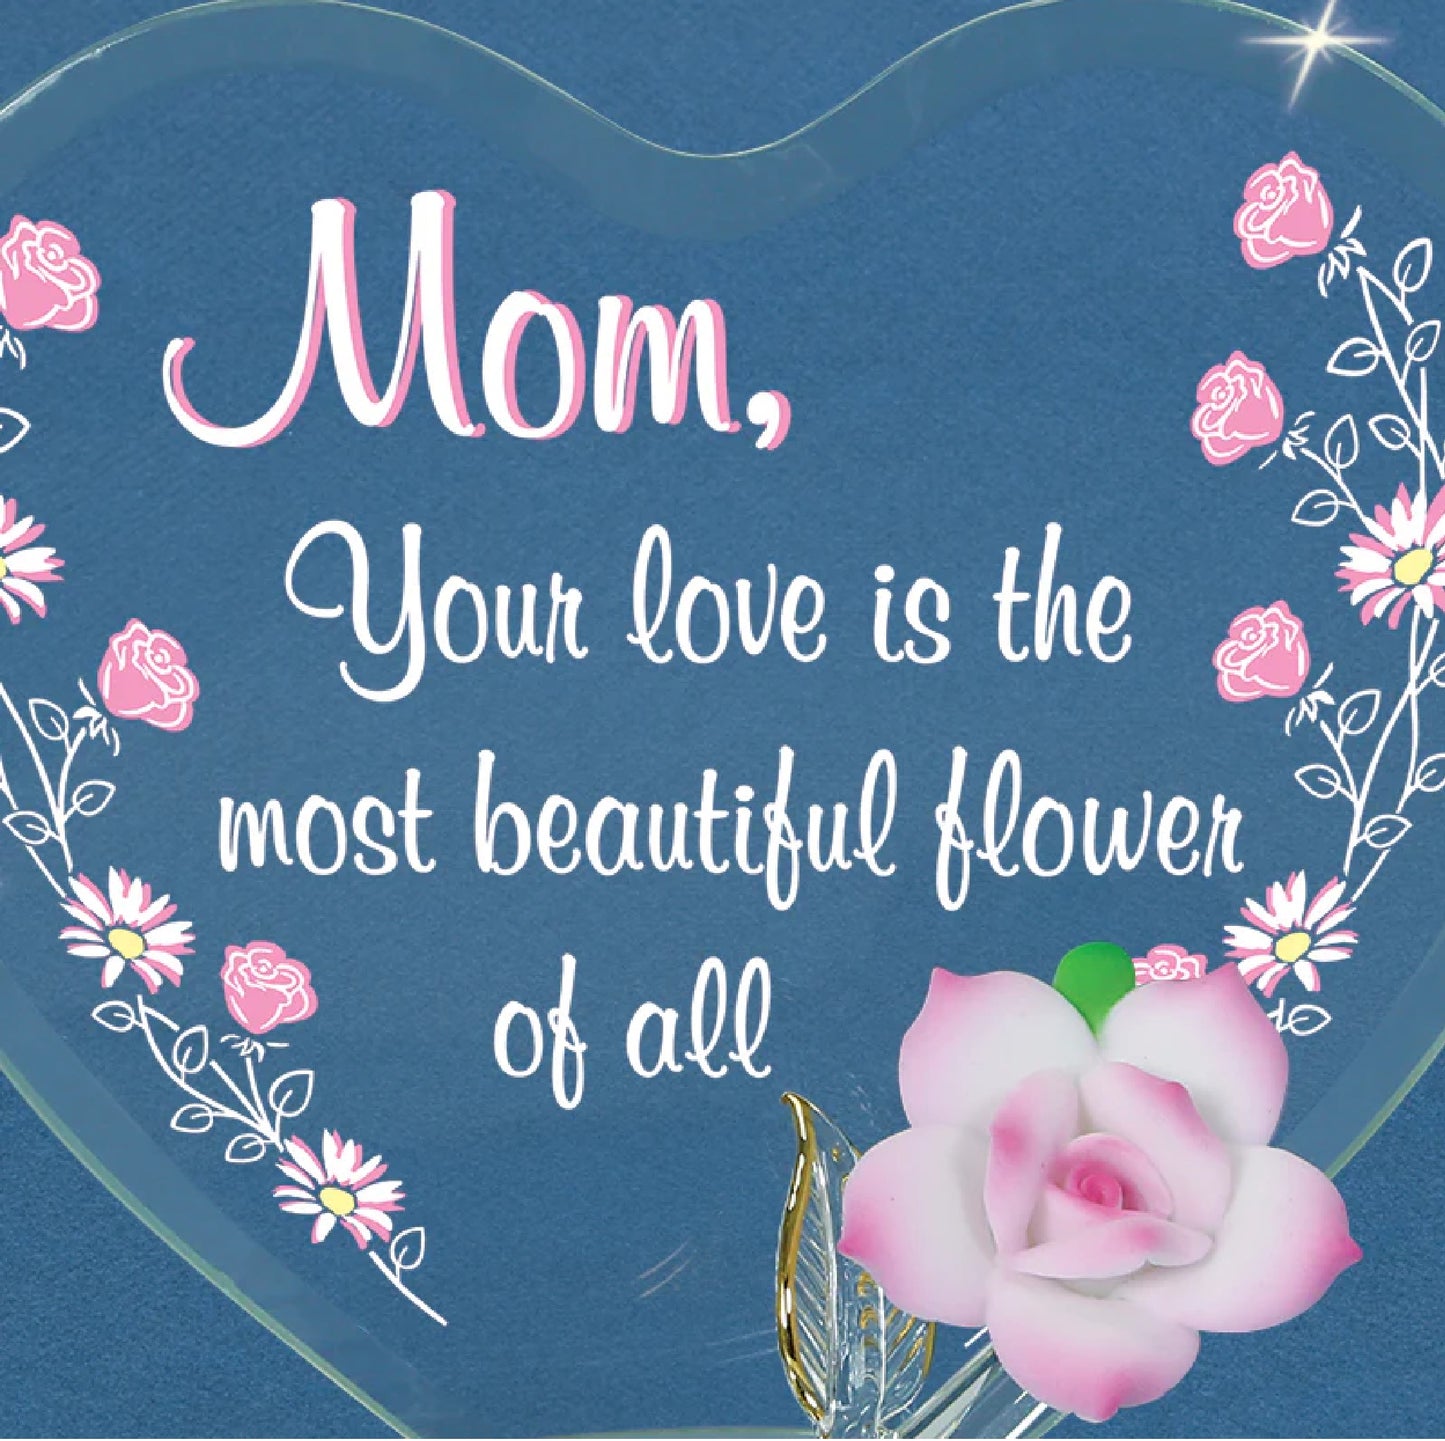 Glass Baron Mom Is The Most Beautiful Flower Plaque